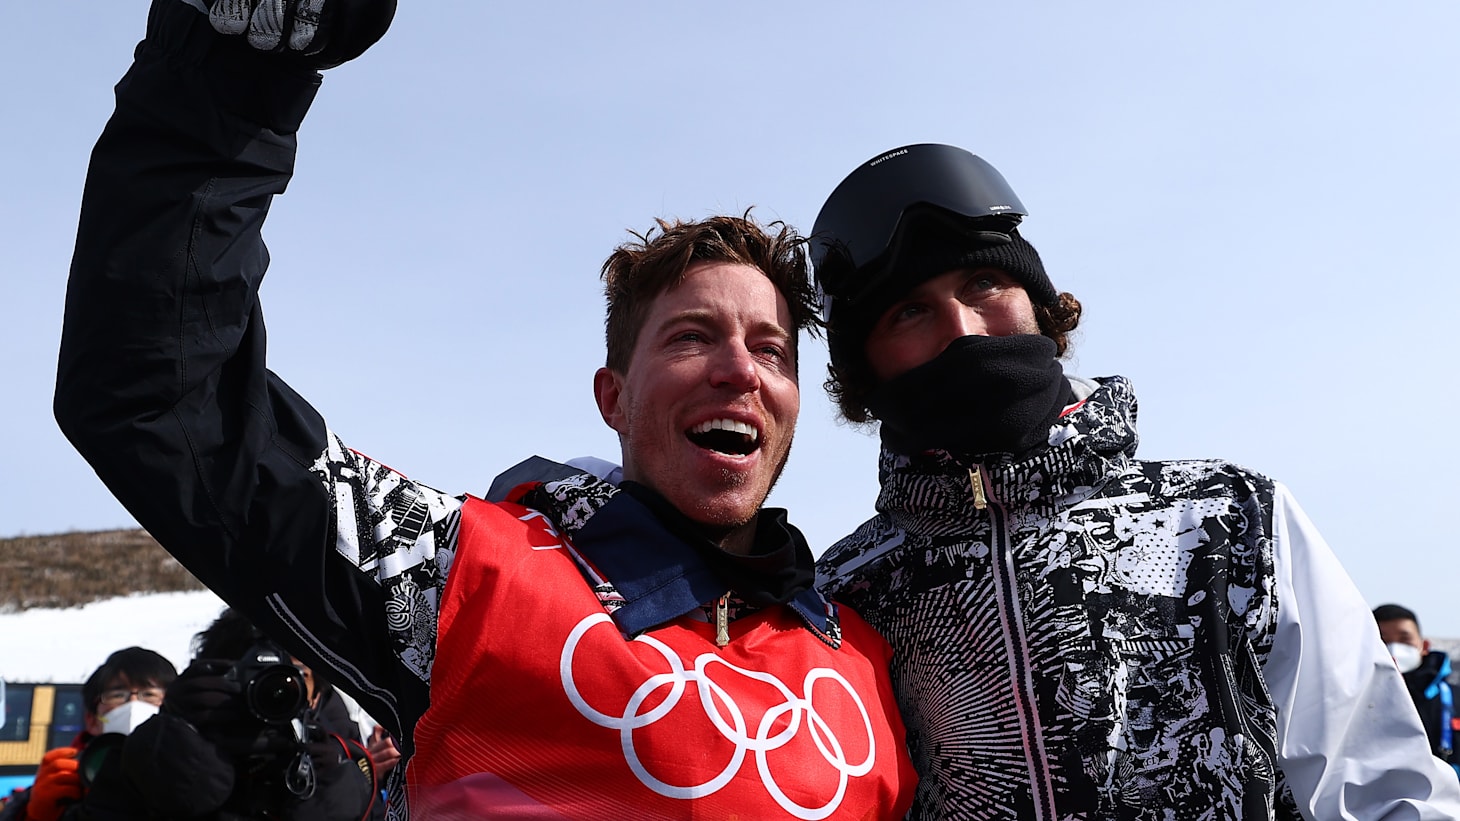 One board legend to another: Tony Hawk urges Shaun White to keep riding